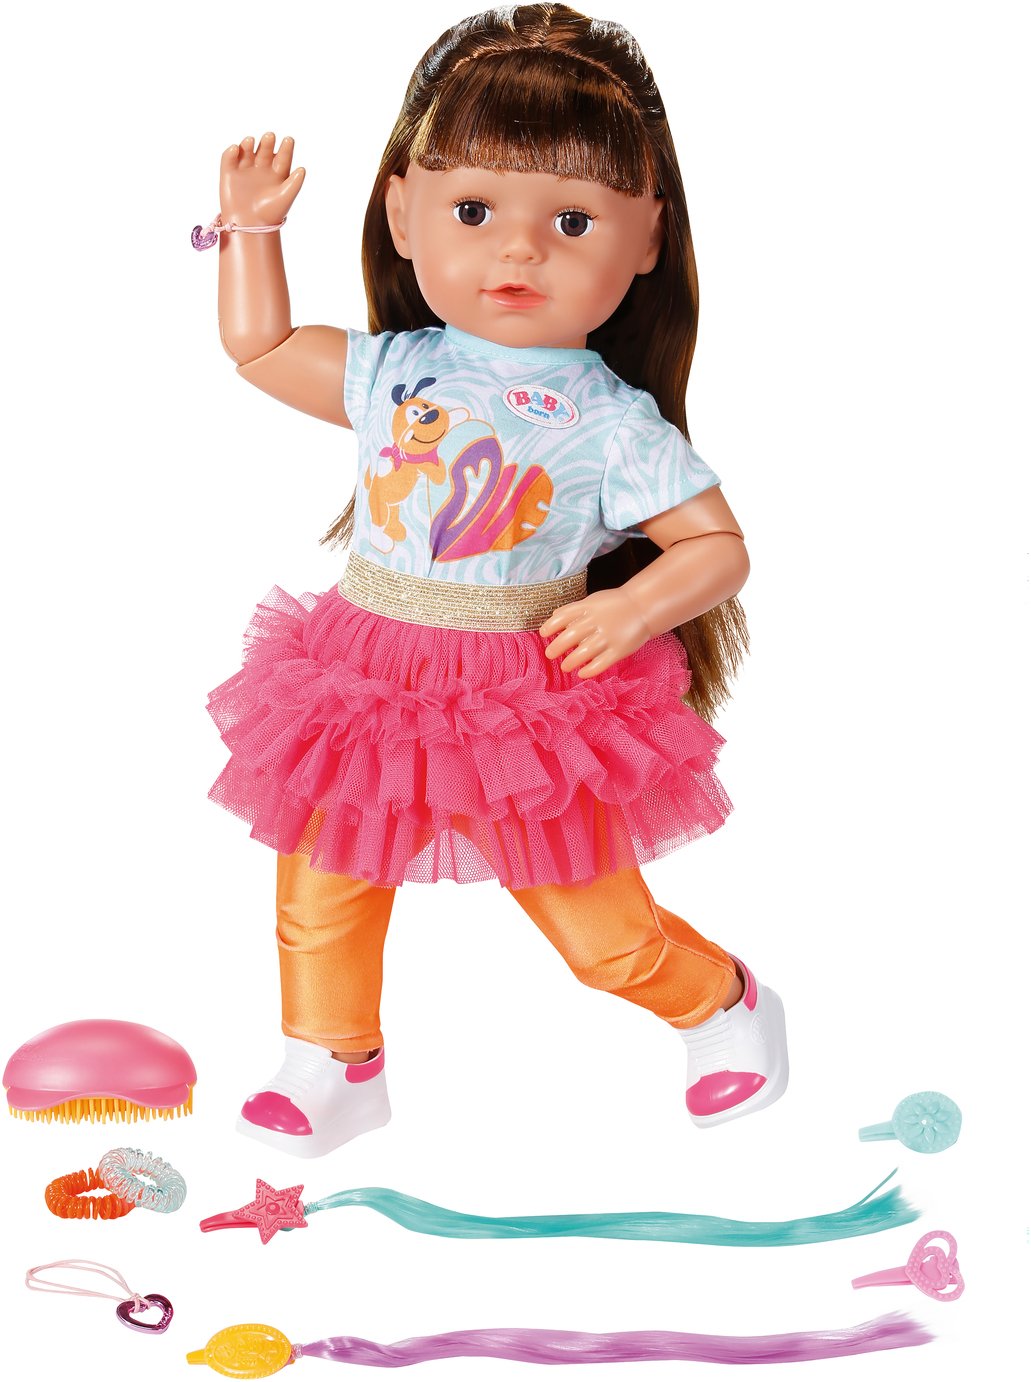 BABY born Sister Play and Style Brunette Doll  - 17inch/43cm